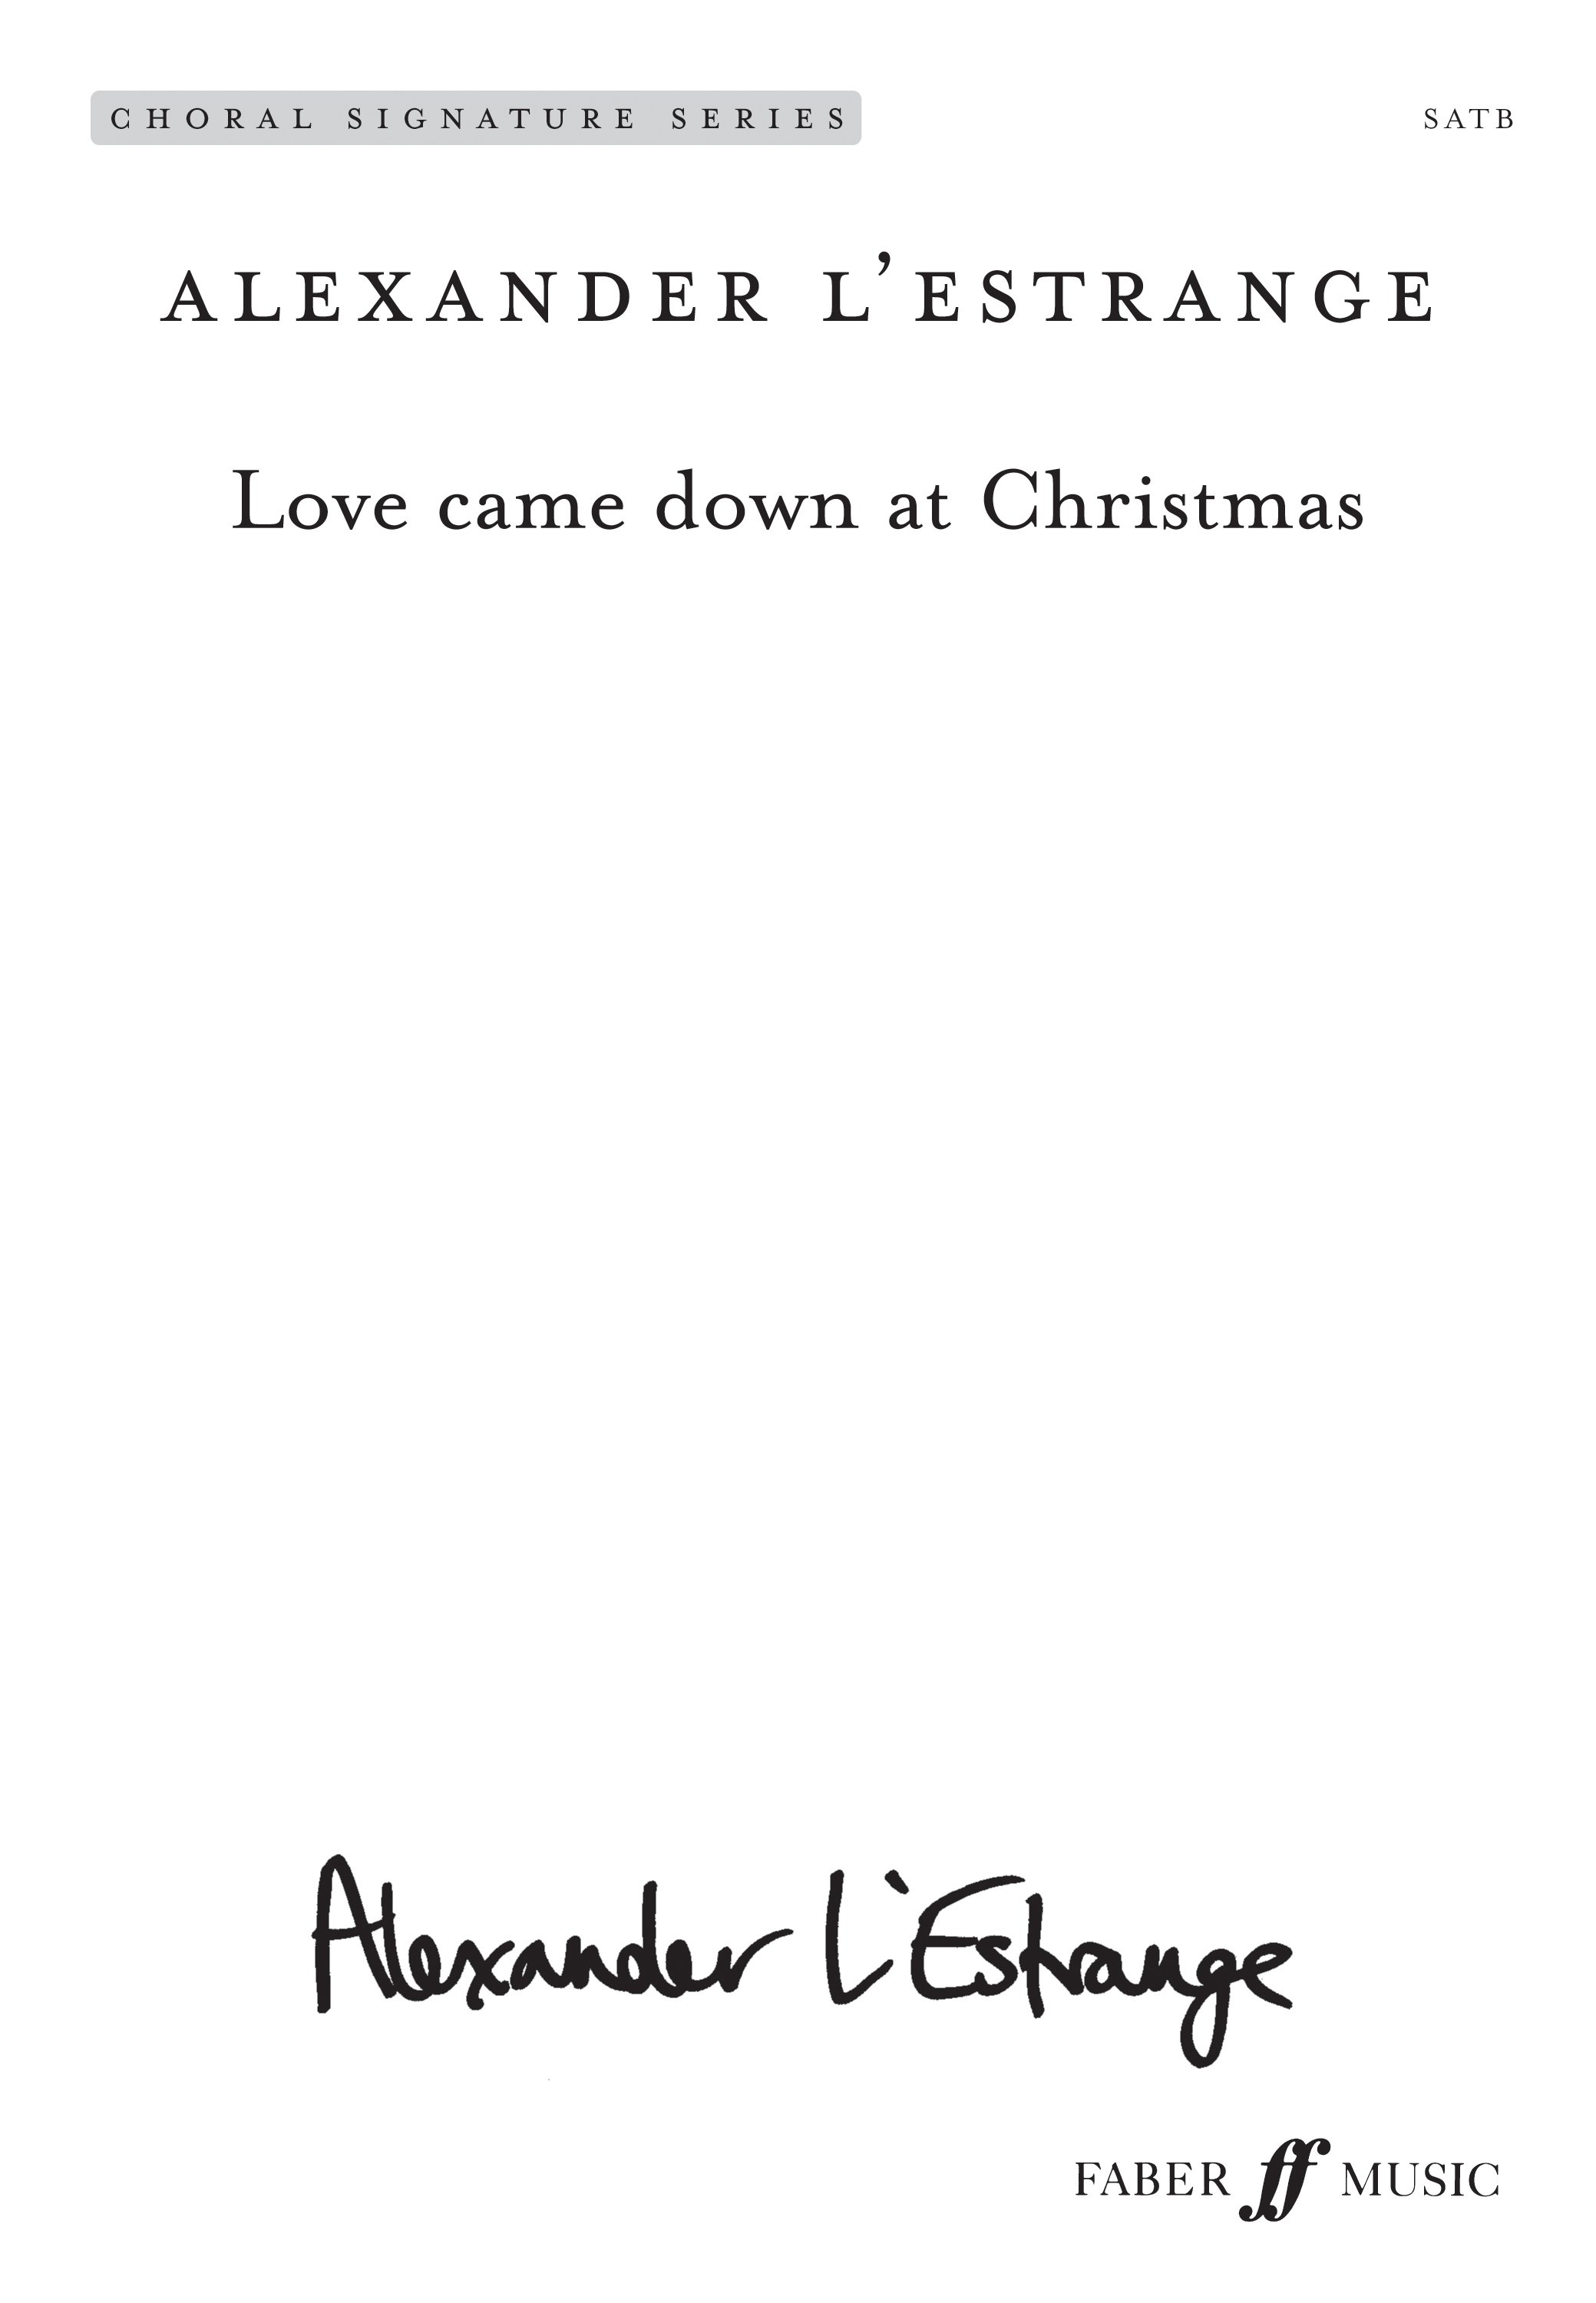 Love came down at Christmas OLD COVER.jpg